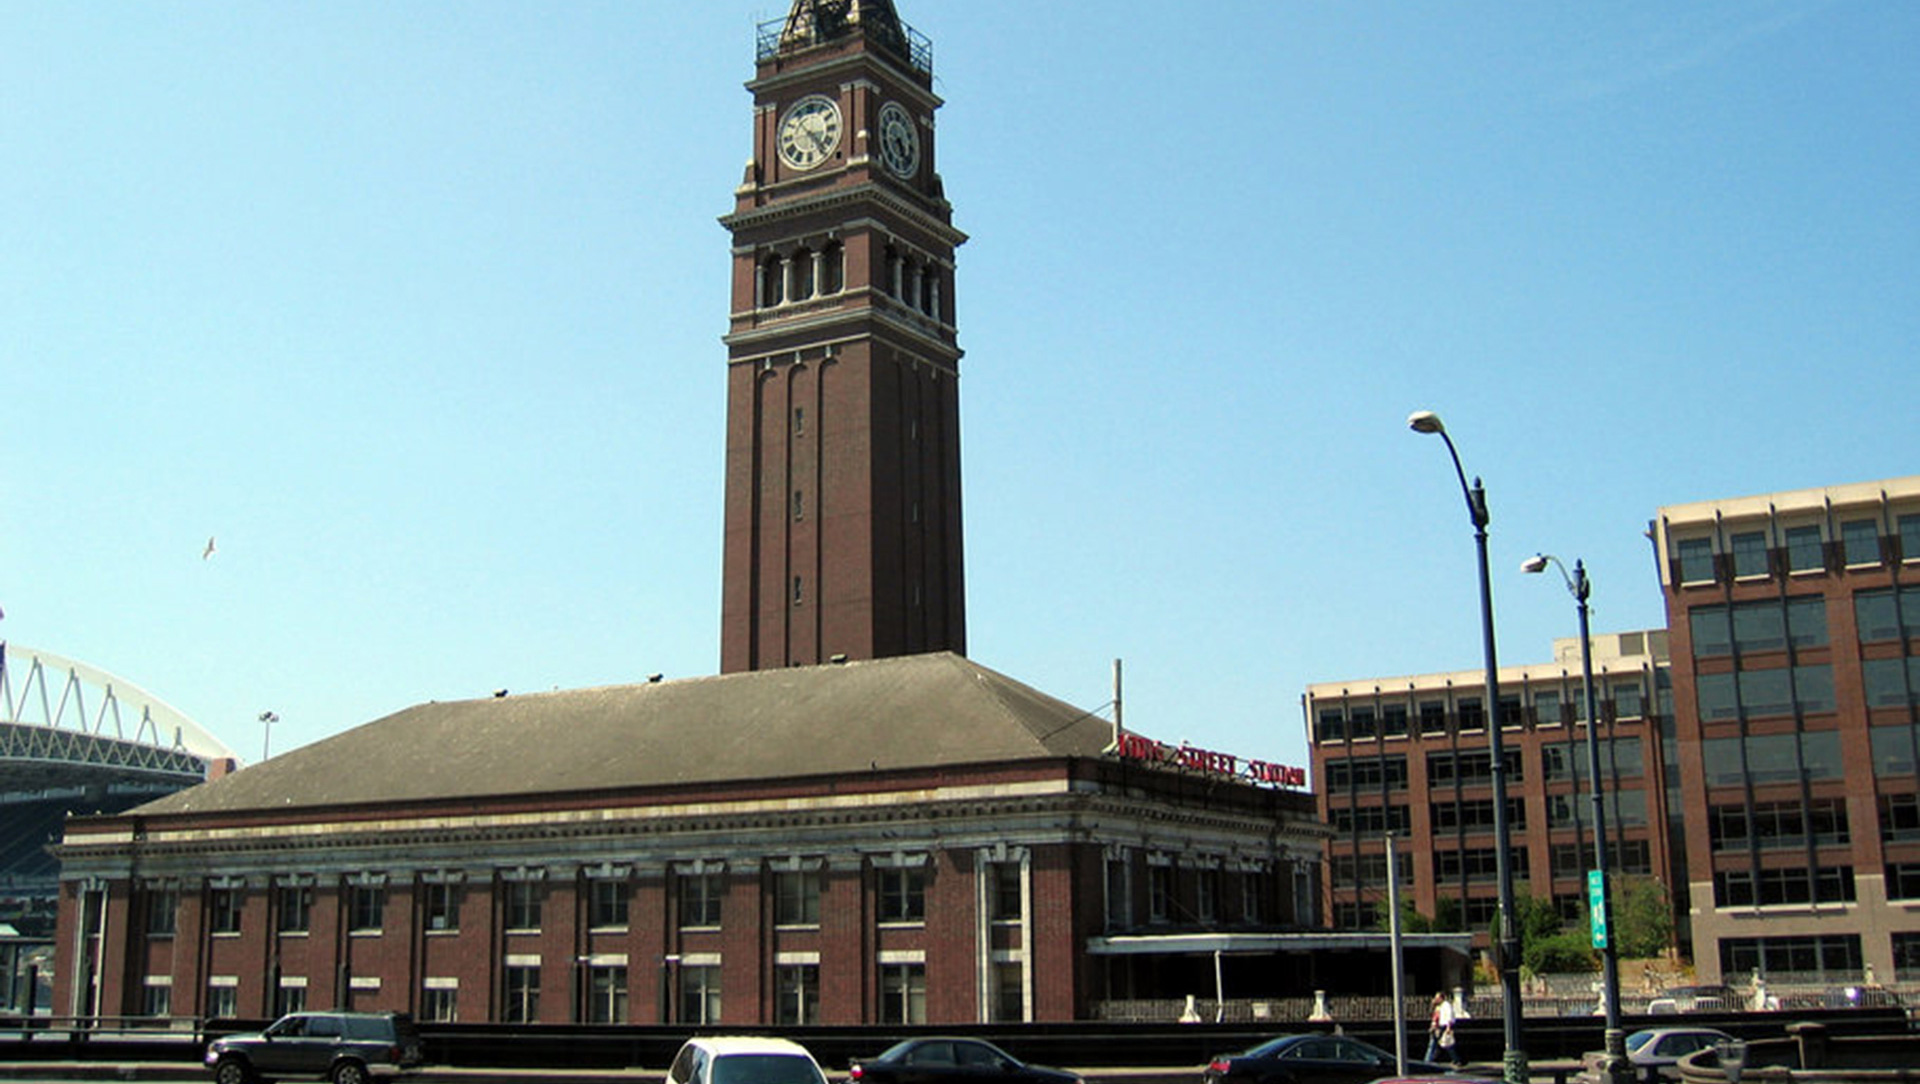 King Street Station A 